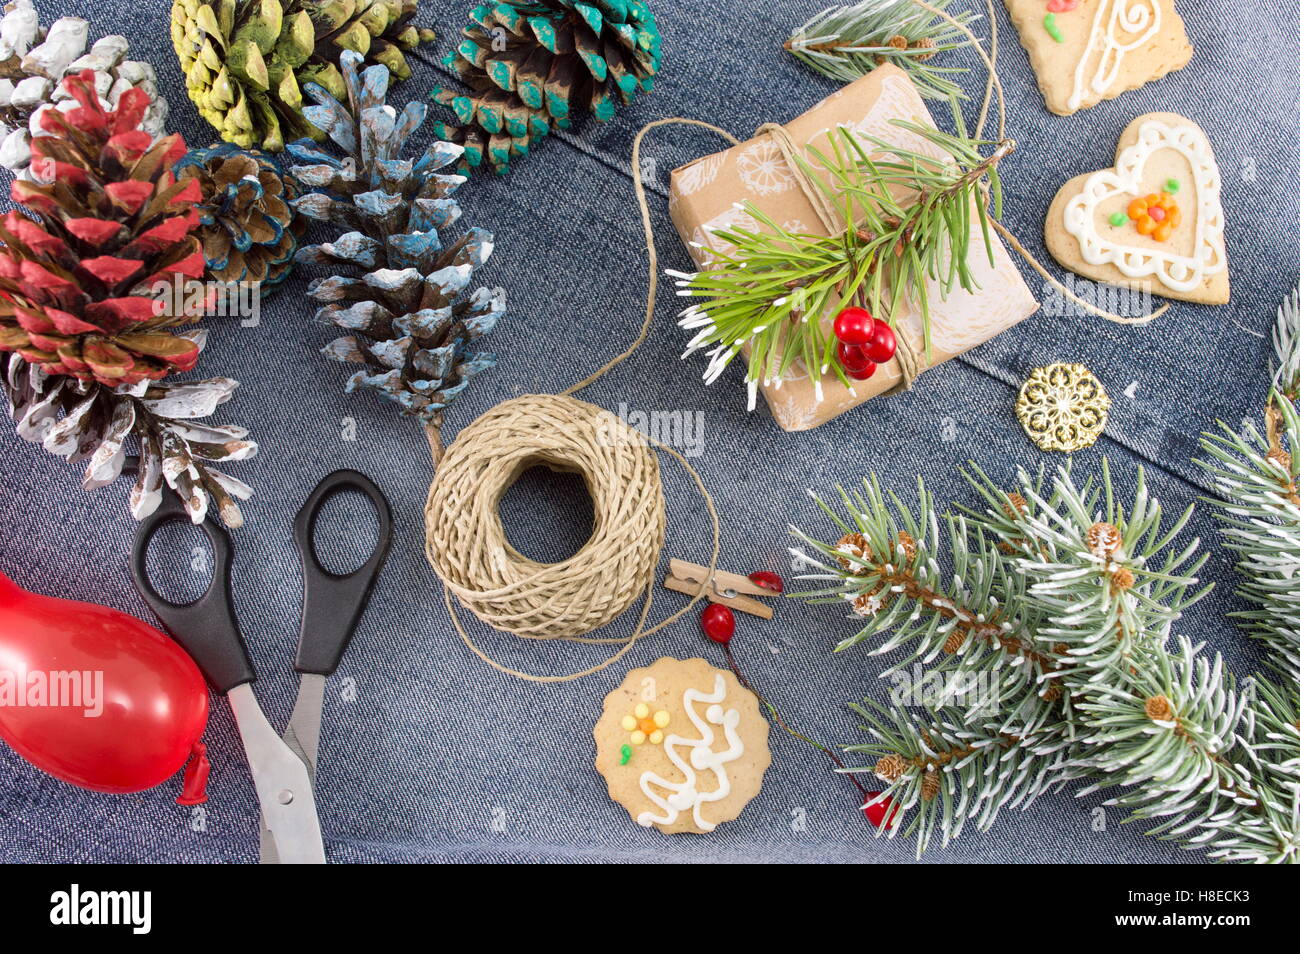 Decorations and tools for packing perfect Christmas present Stock Photo